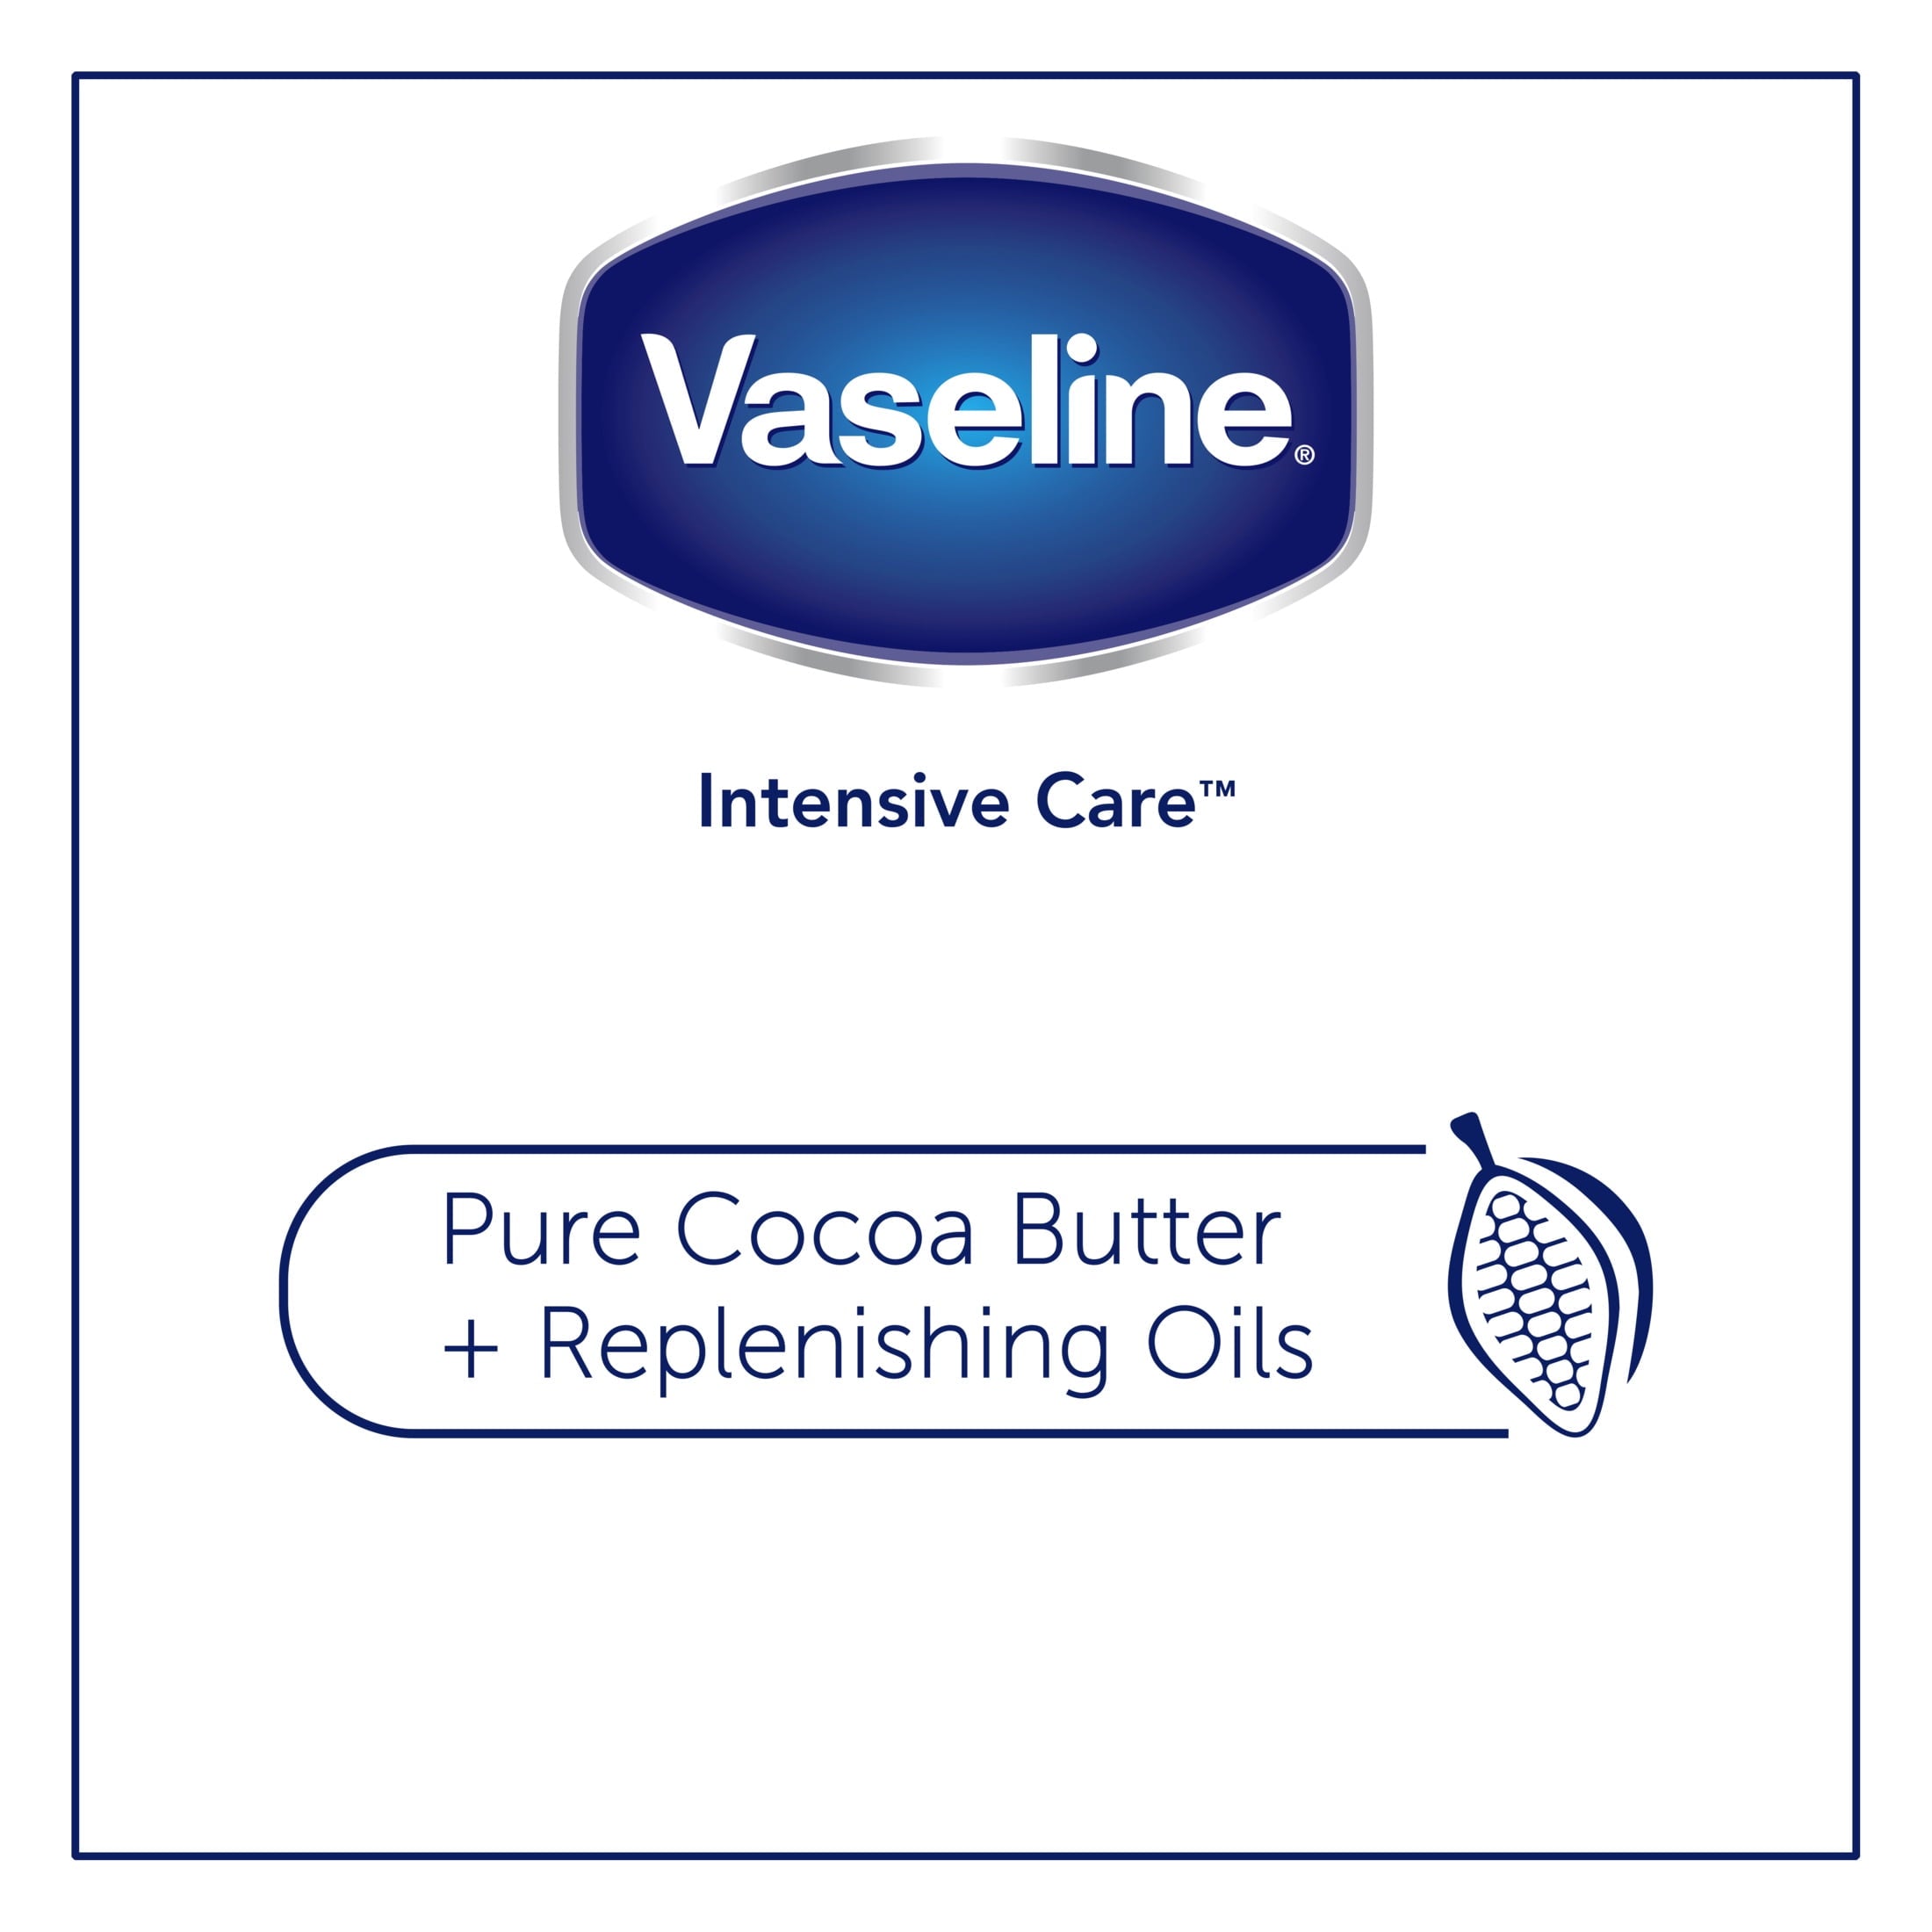 Wholesale prices with free shipping all over United States Vaseline Intensive Care Cocoa Radiant for Glowing Skin, 6.8 oz - Steven Deals